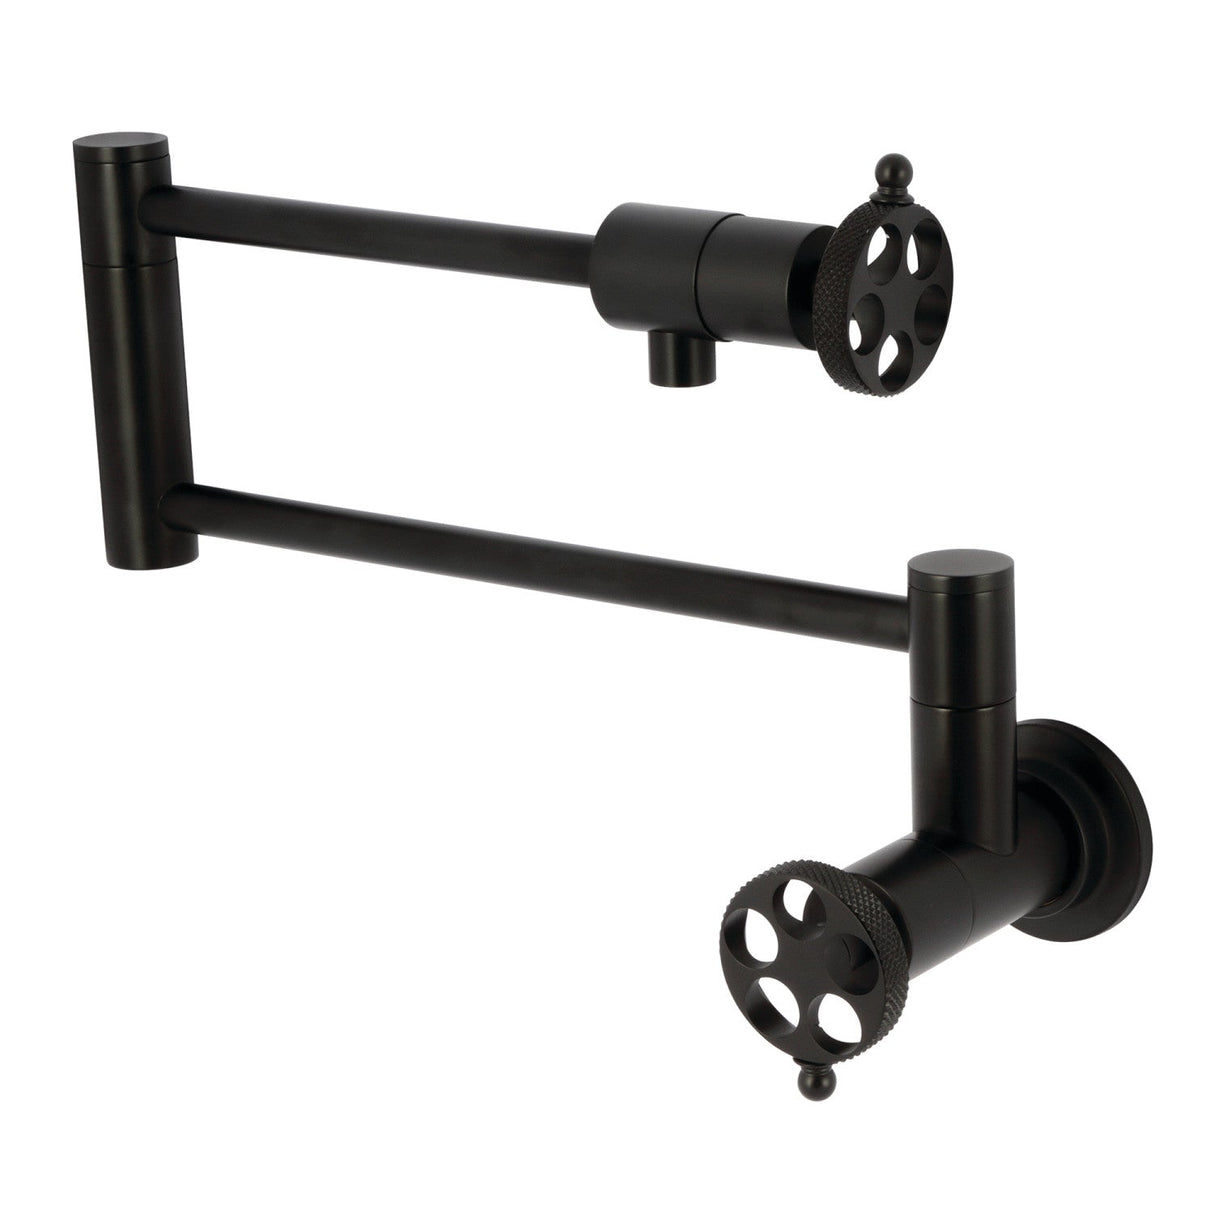 Webb KS4100RKX Two-Handle 1-Hole Wall Mount Pot Filler with Knurled Handle, Matte Black